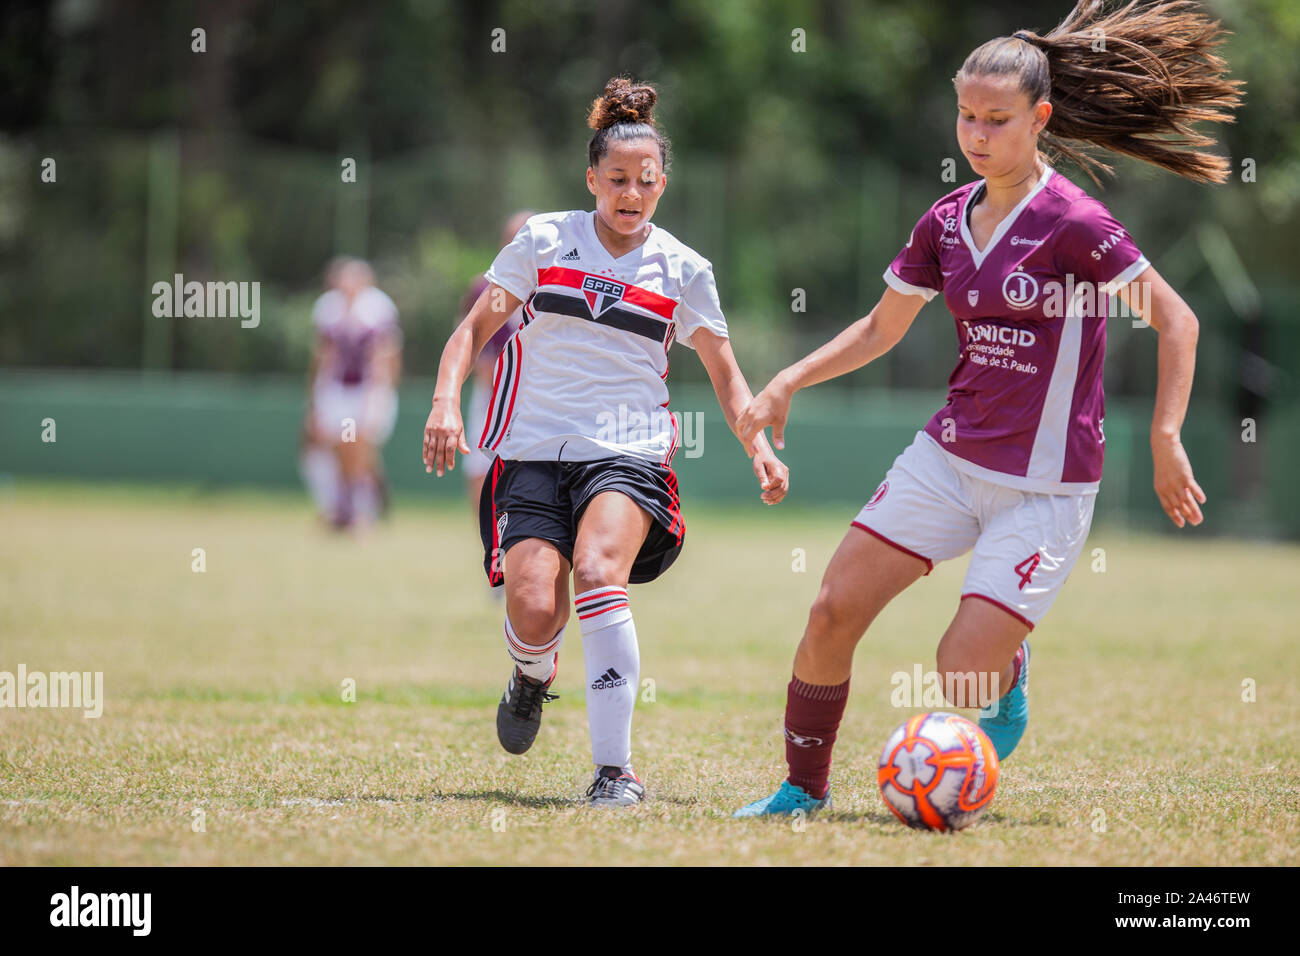 Vinhedo, Brazil. 12th Oct, 2019. Iara from Sao Paulo in play with Sabrina from Juventus. Sao Paulo and Juventus compete in the Paulista Women's Football Cup, the match took place this morning of Saturday, August 12, 2019, in Vinhedoo Paulo. Credit: Van Campos/pos/FotoArena/Alamy Live News Stock Photo